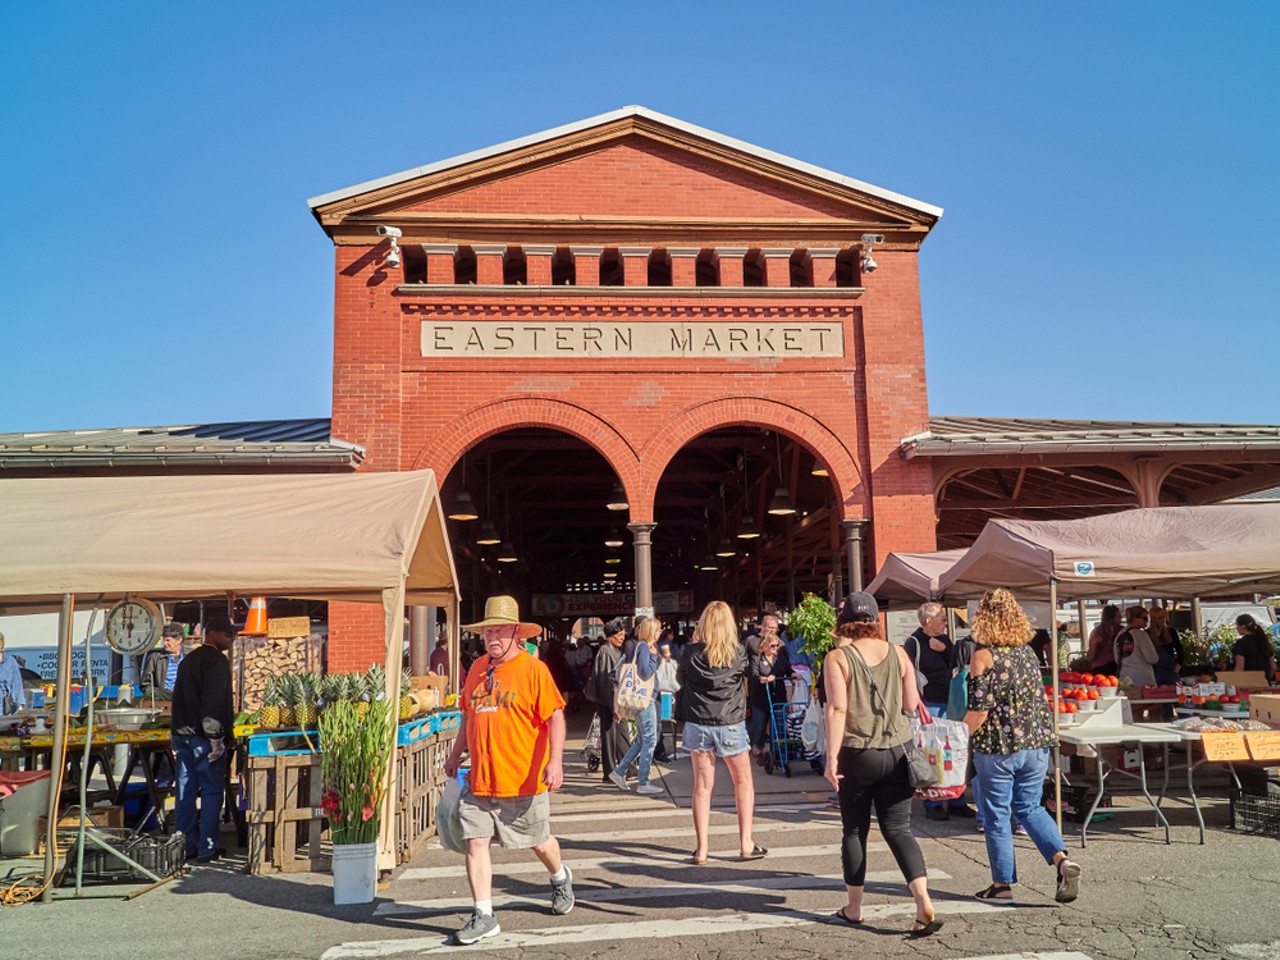 Head to Eastern Market for fresh fall veggies
Autumn is harvest time. Visit Detroit's farmer’s market for fresh, seasonal veggies like squash and pumpkins to spice up your meals or carve into jack-o’-lanterns.